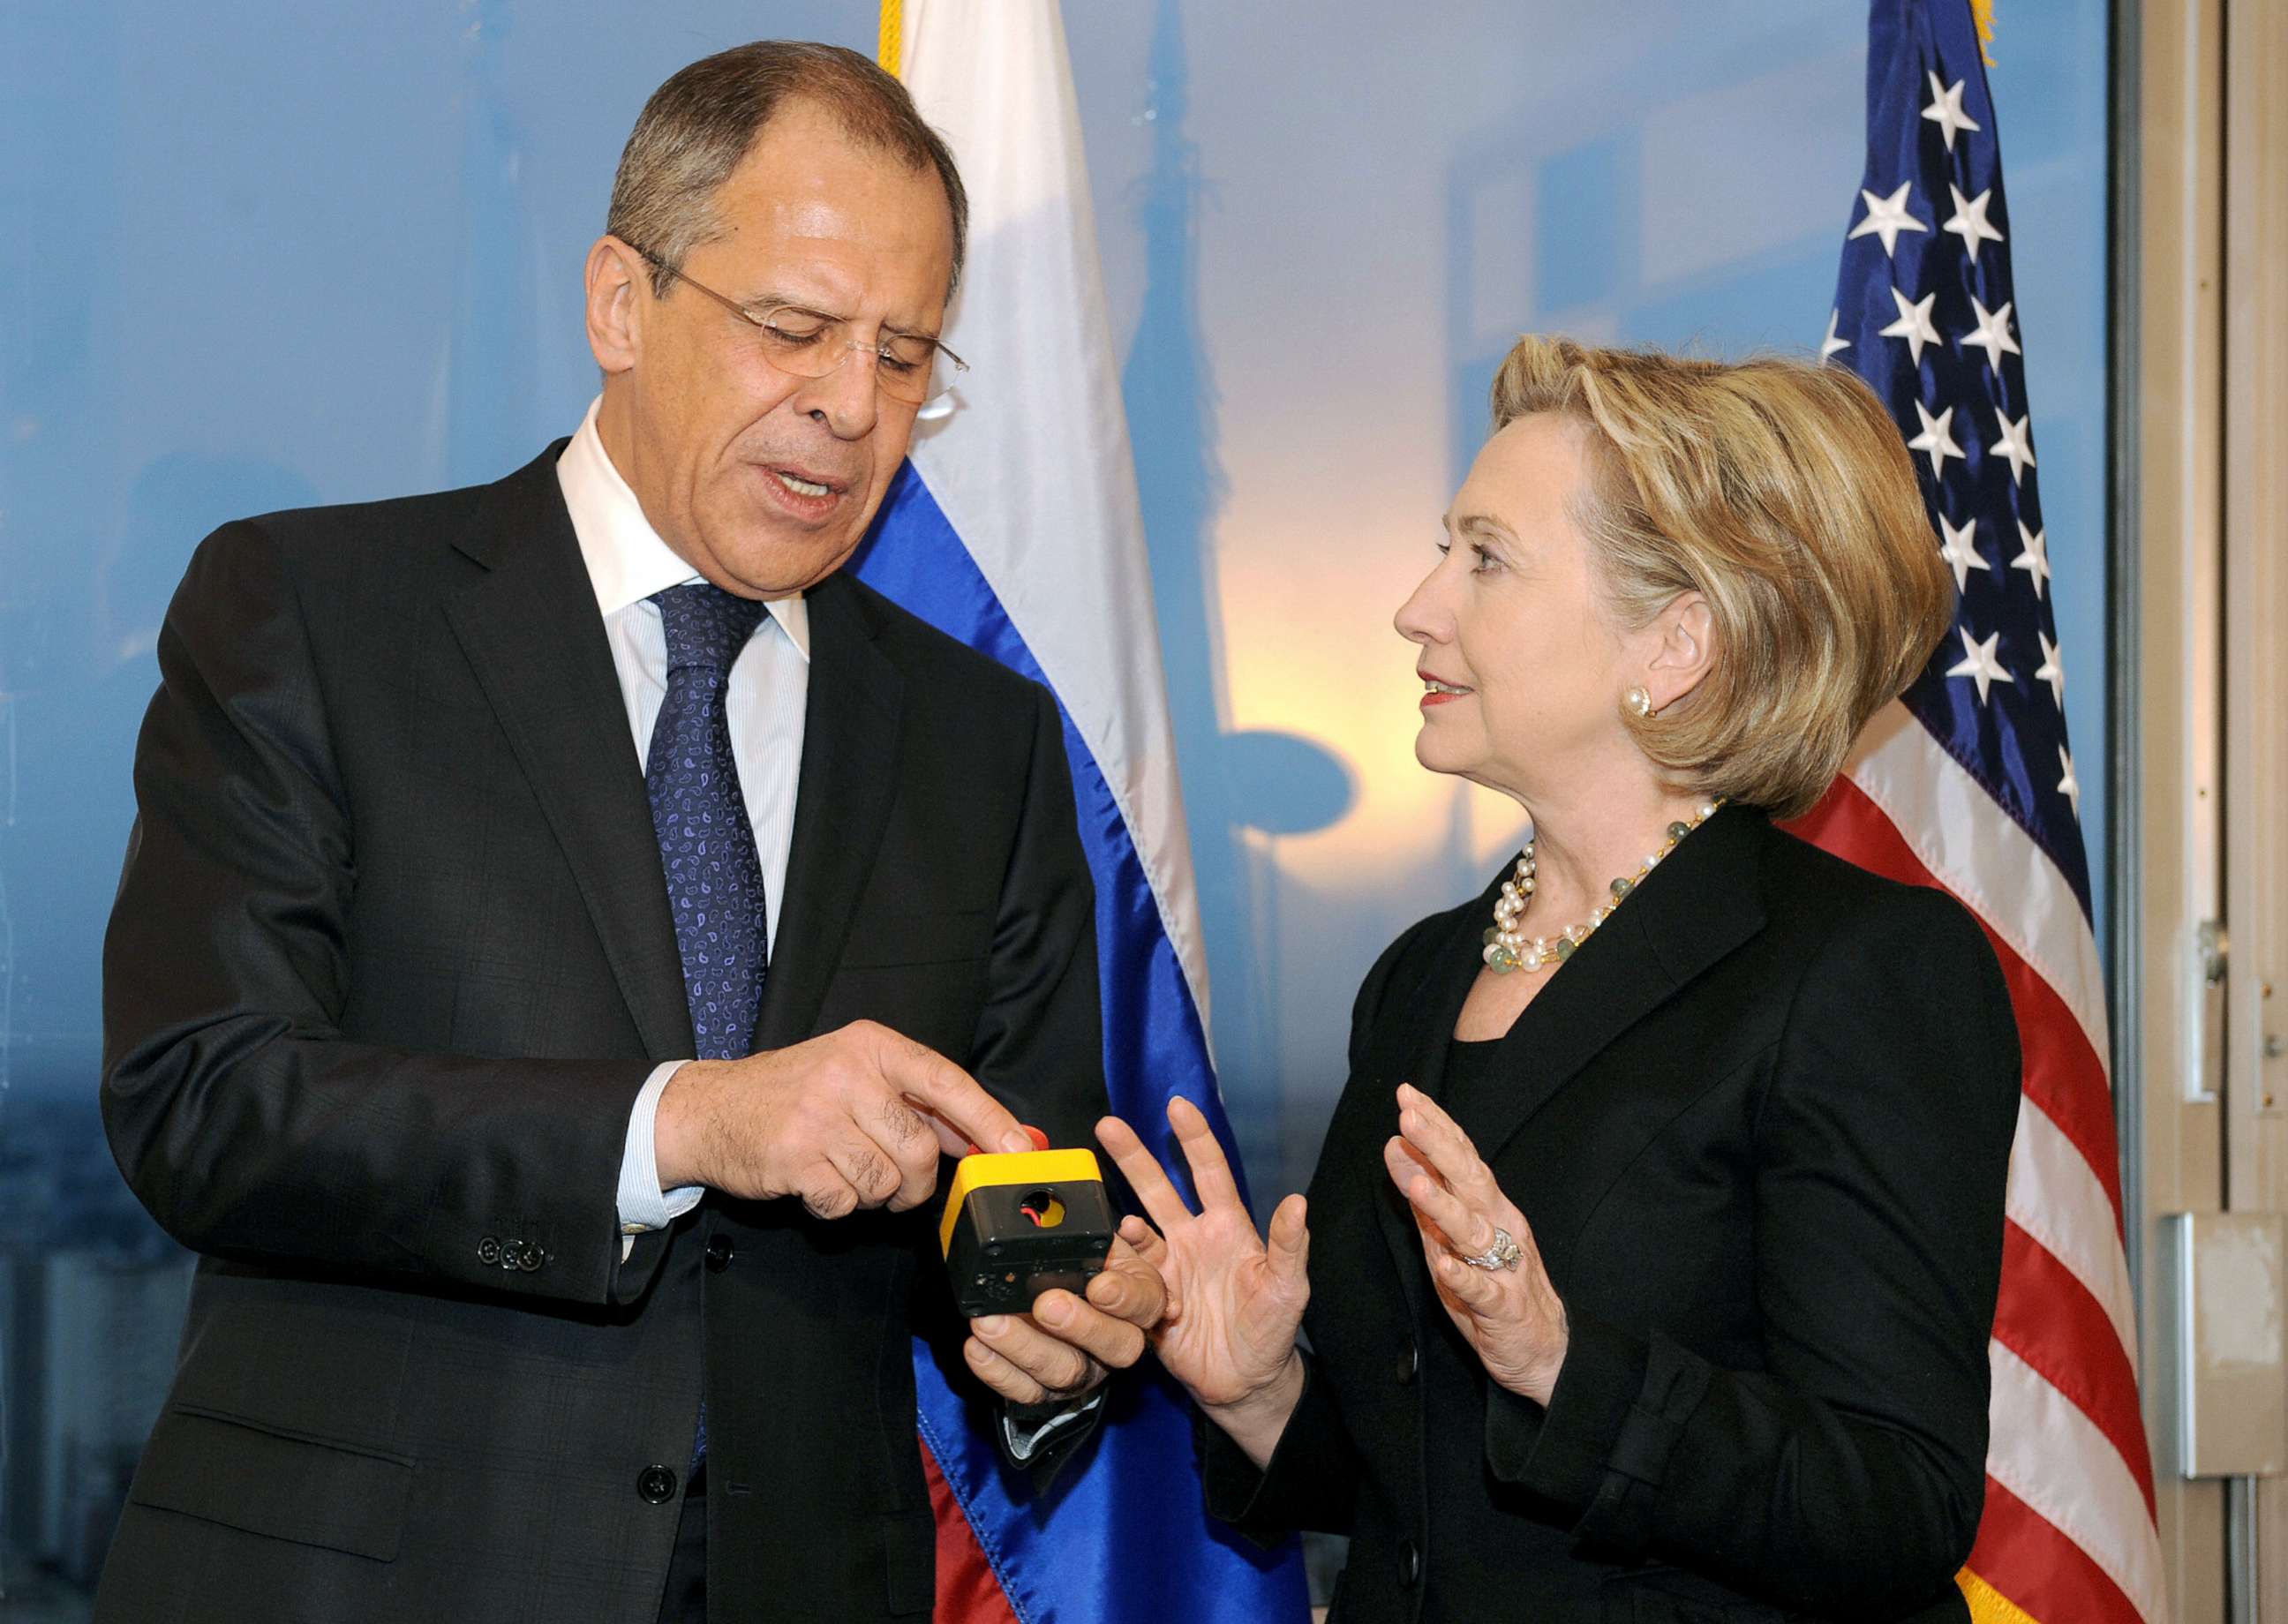 PHOTO: Secretary of State Hillary Clinton with Russian Foreign Minister Sergei Lavrov, after she gave him a device with red knob, during a meeting, March 6, 2009, in Geneva.